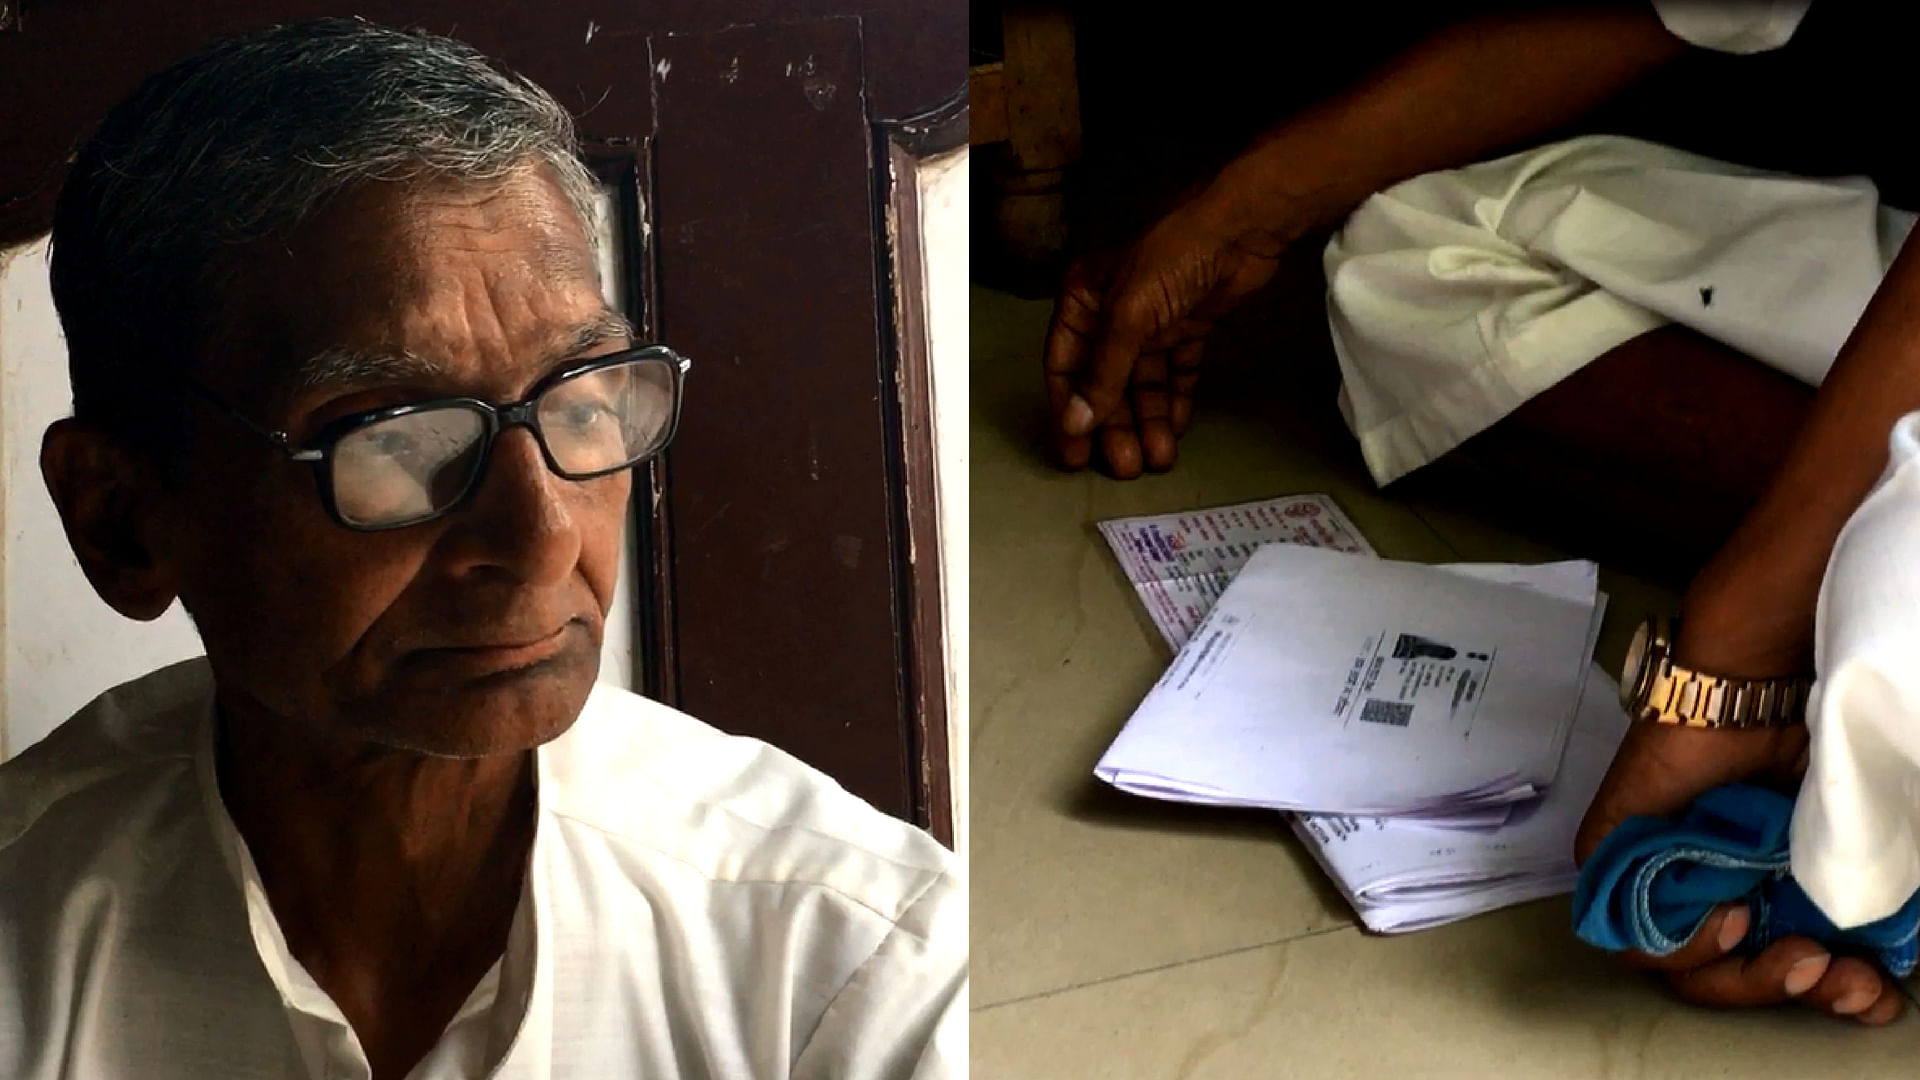 14-year-old Sachin’s father, Dharamveer has been showing Sachin’s documents to everyone since he was arrested. He tears up while speaking to The Quint from his home in Kaliyagarhi, Meerut.